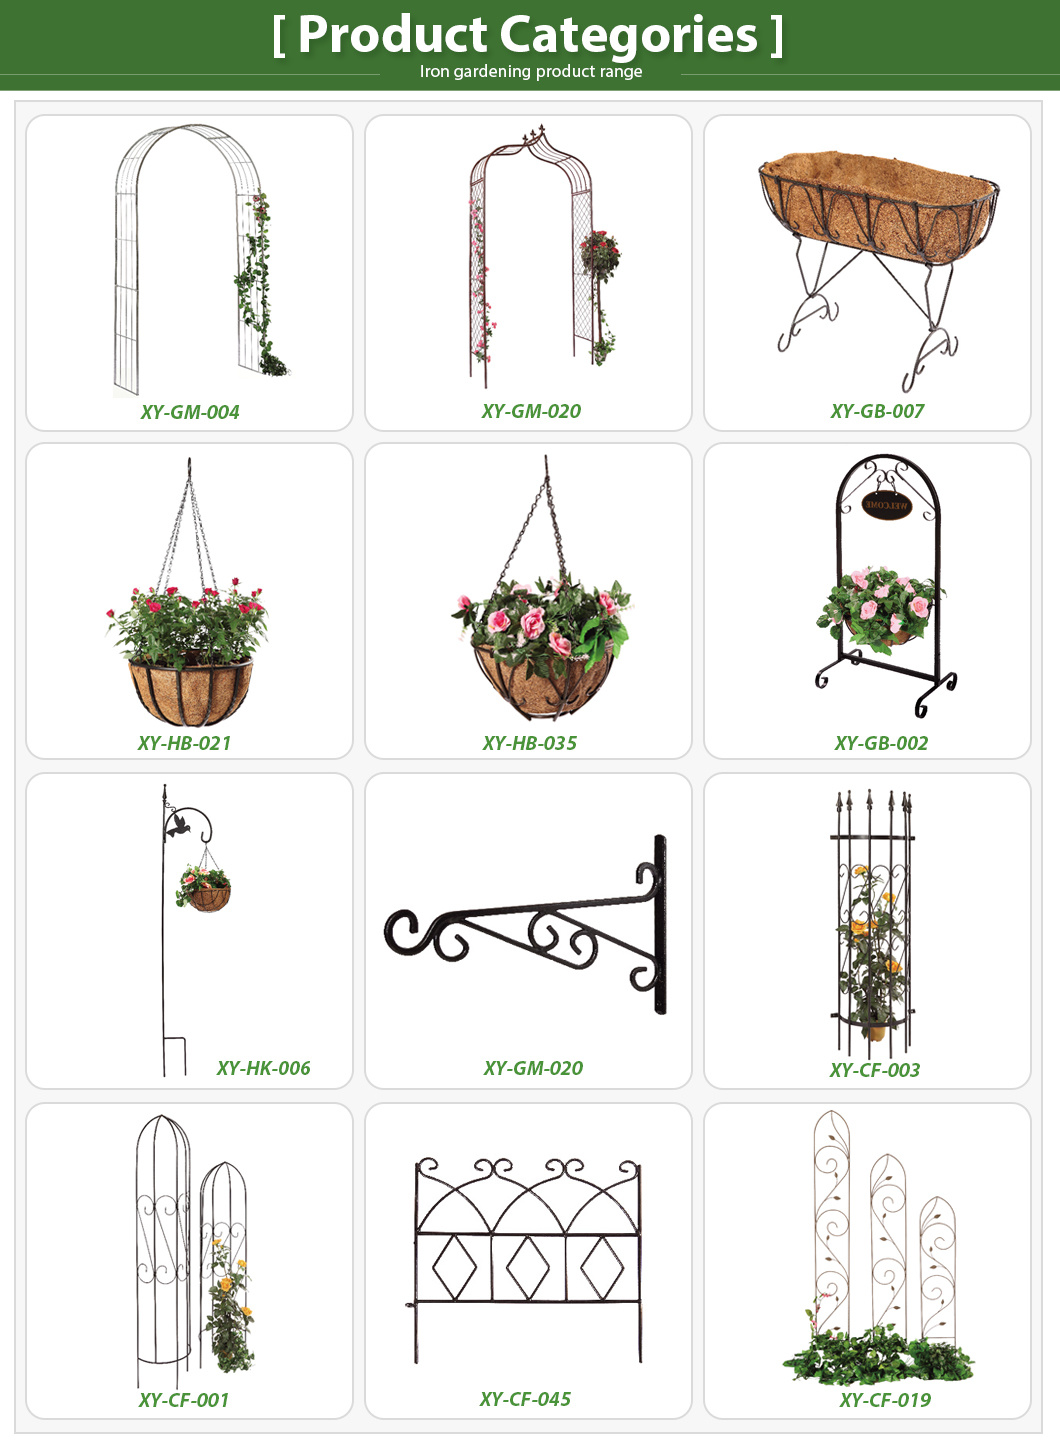 Heart-Shaped Iron Wire Hanging Basket with Chains and Coco Liner (BH090032)